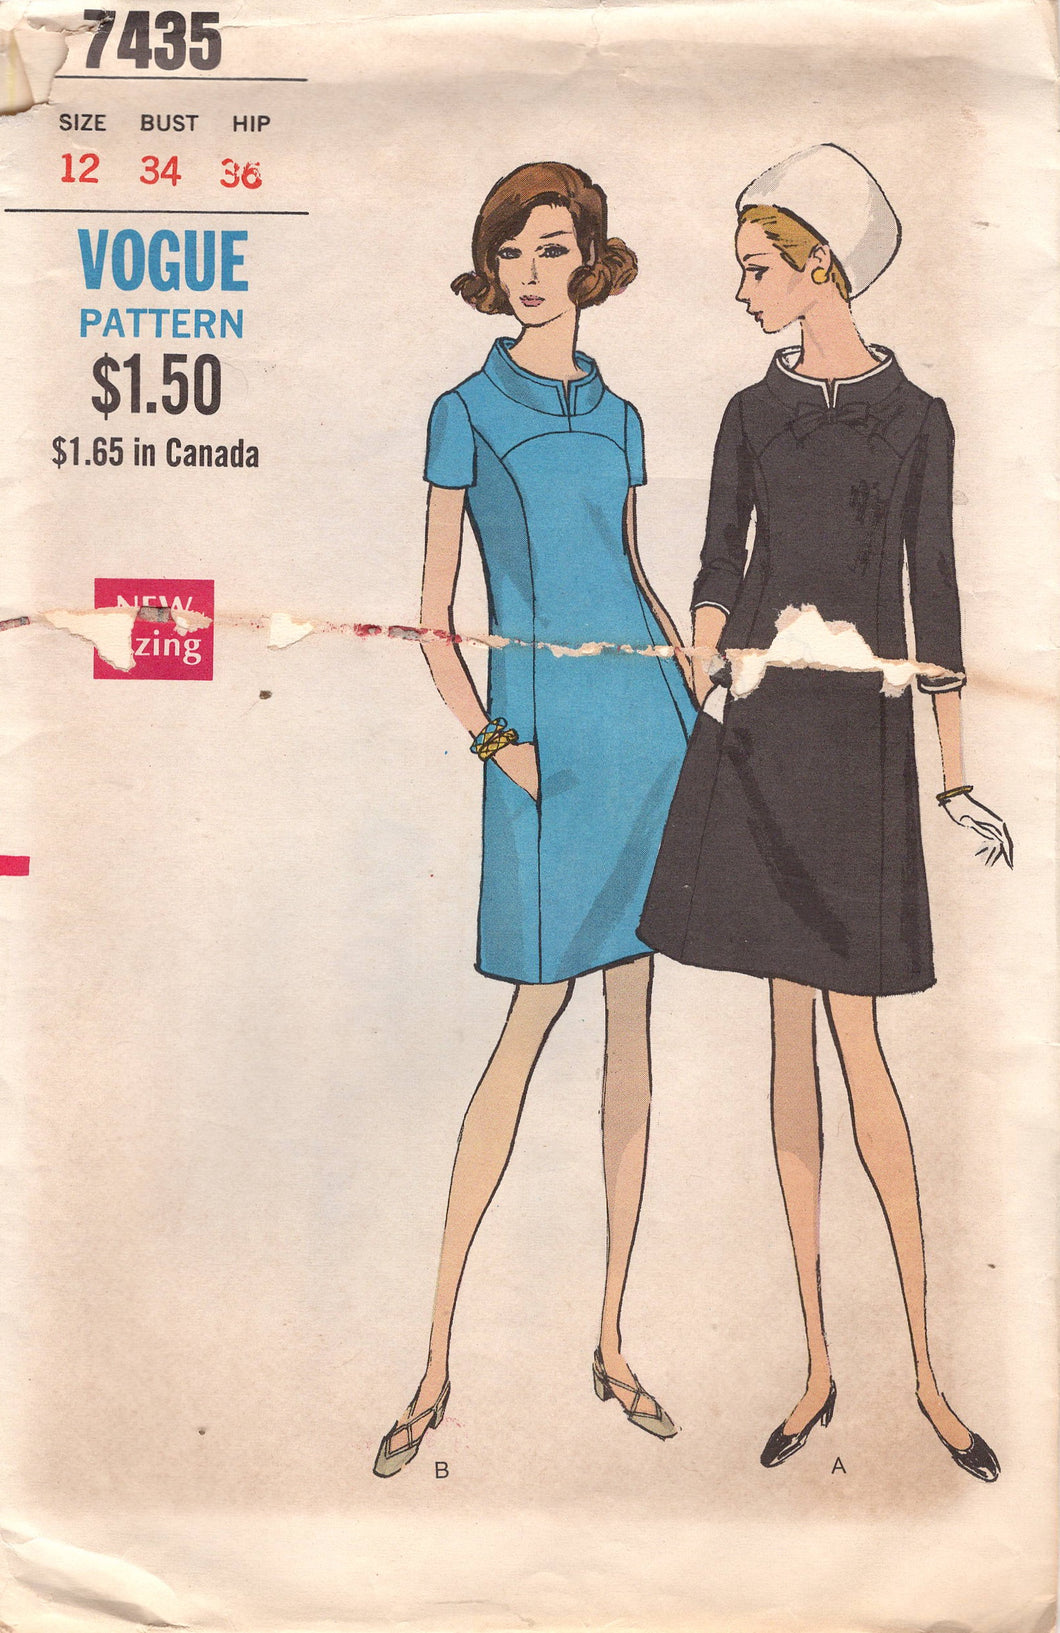 1960's Vogue One Piece Shift Dress with Wide Mandarin Collar and Short or 3/4 Sleeves - Bust 34